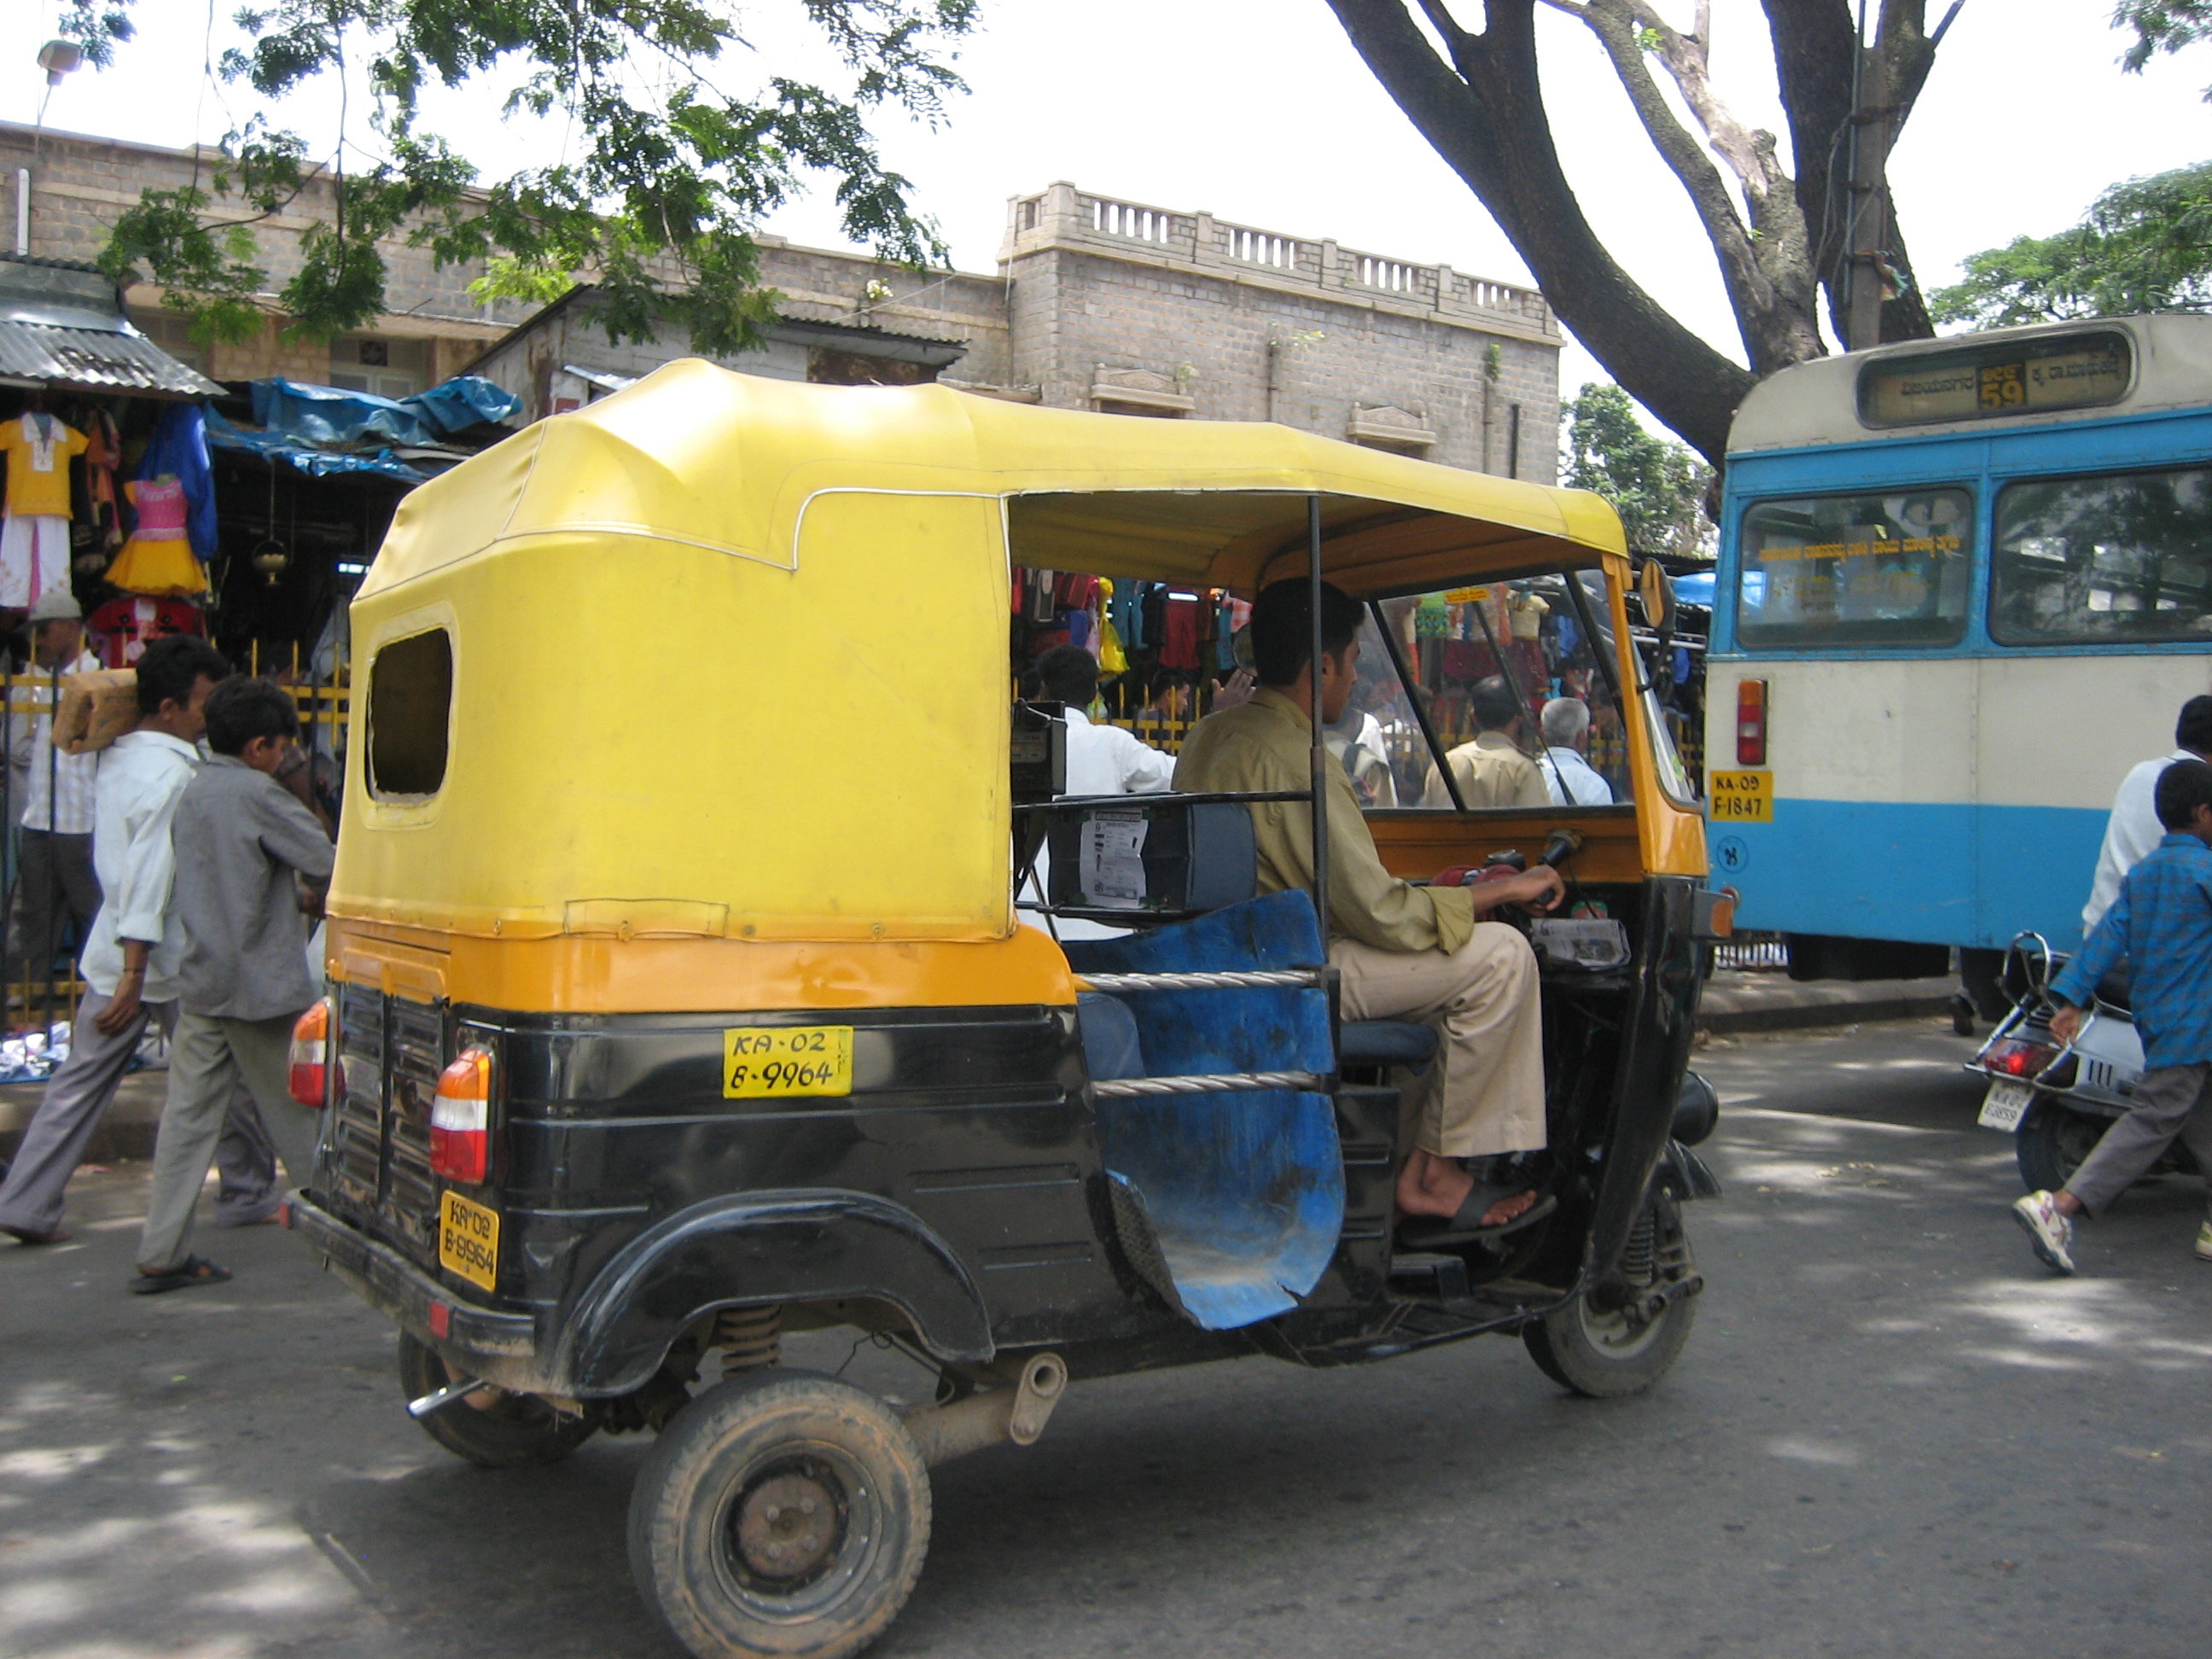 A typical rickshaw in India